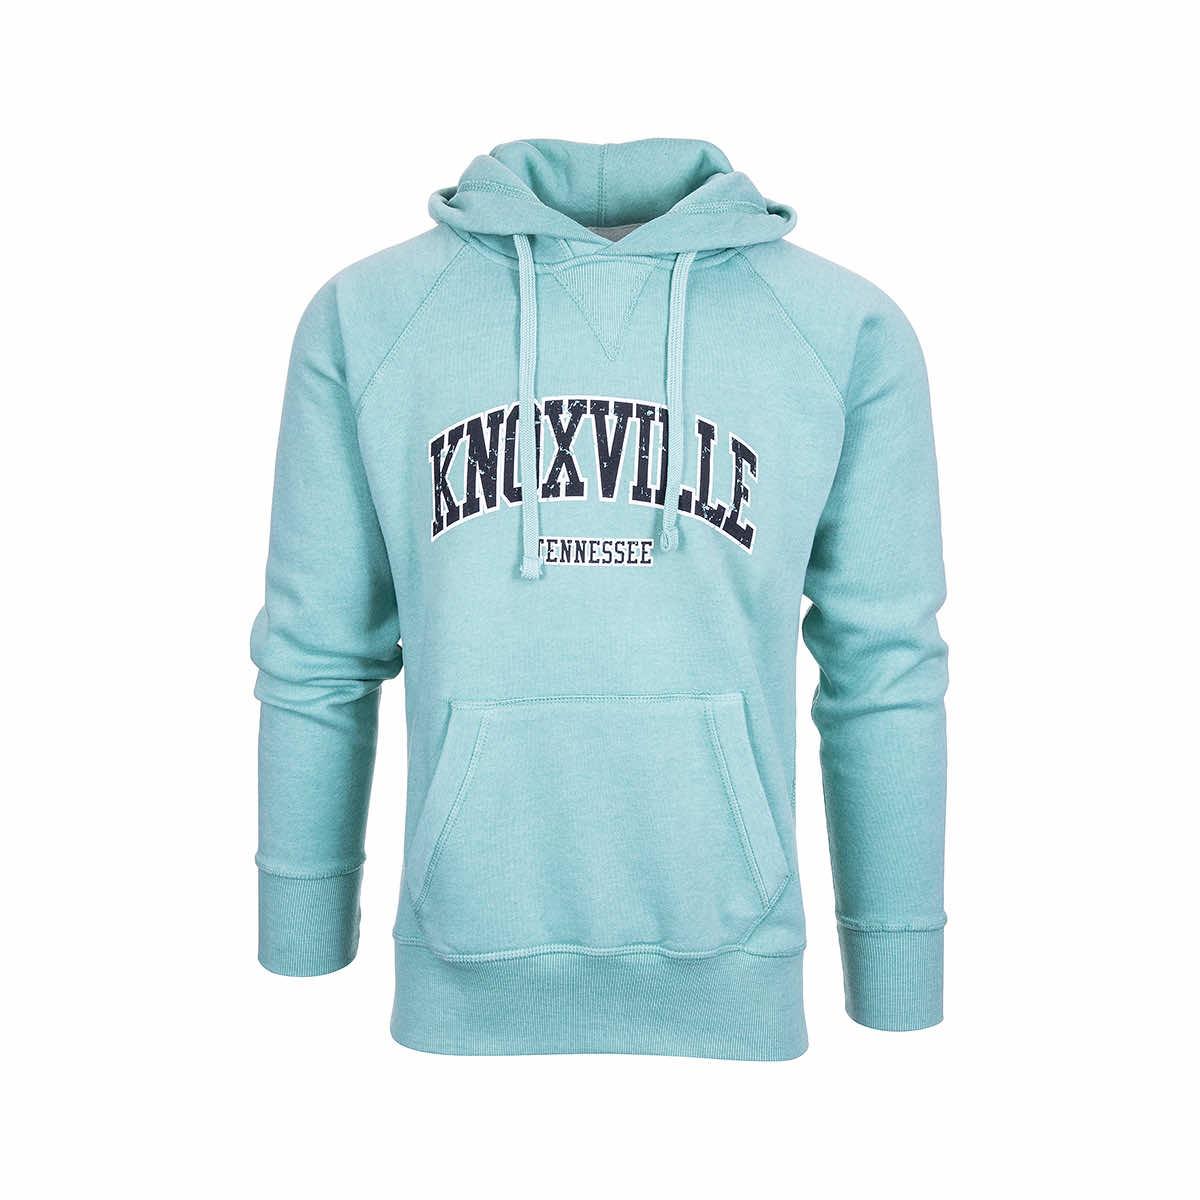  Knoxville Burn Wash Pullover Hoodie